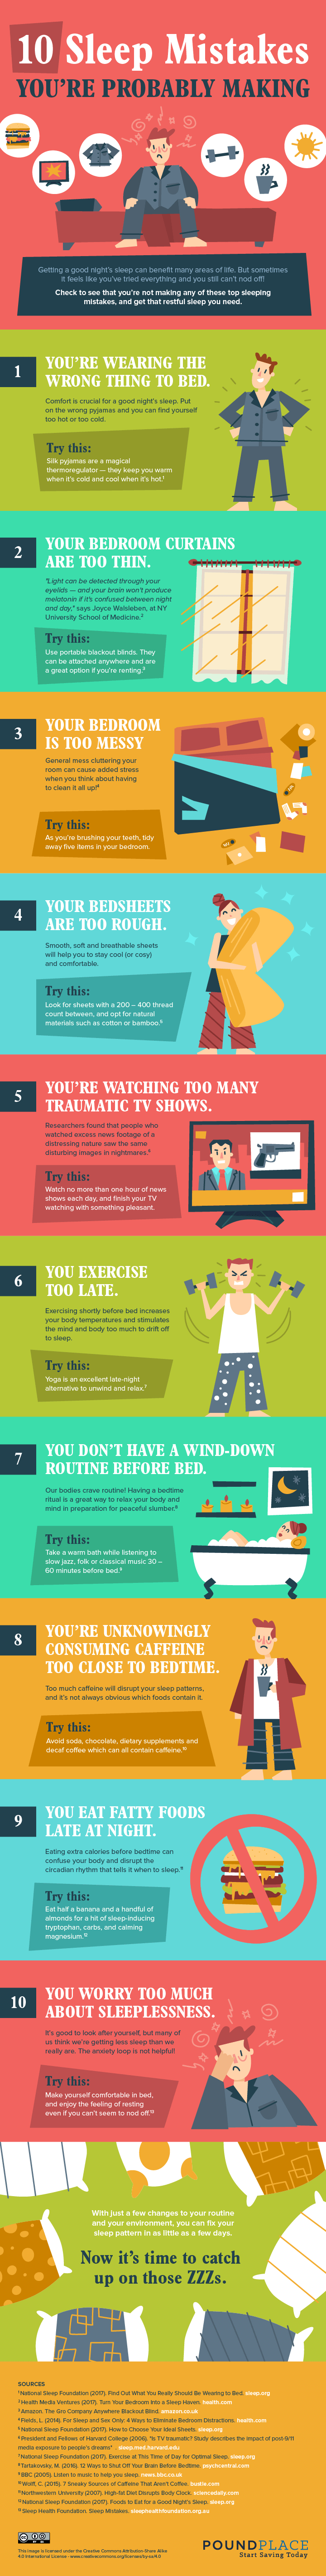 10 Sleep Mistakes You’re Probably Making - #infographic